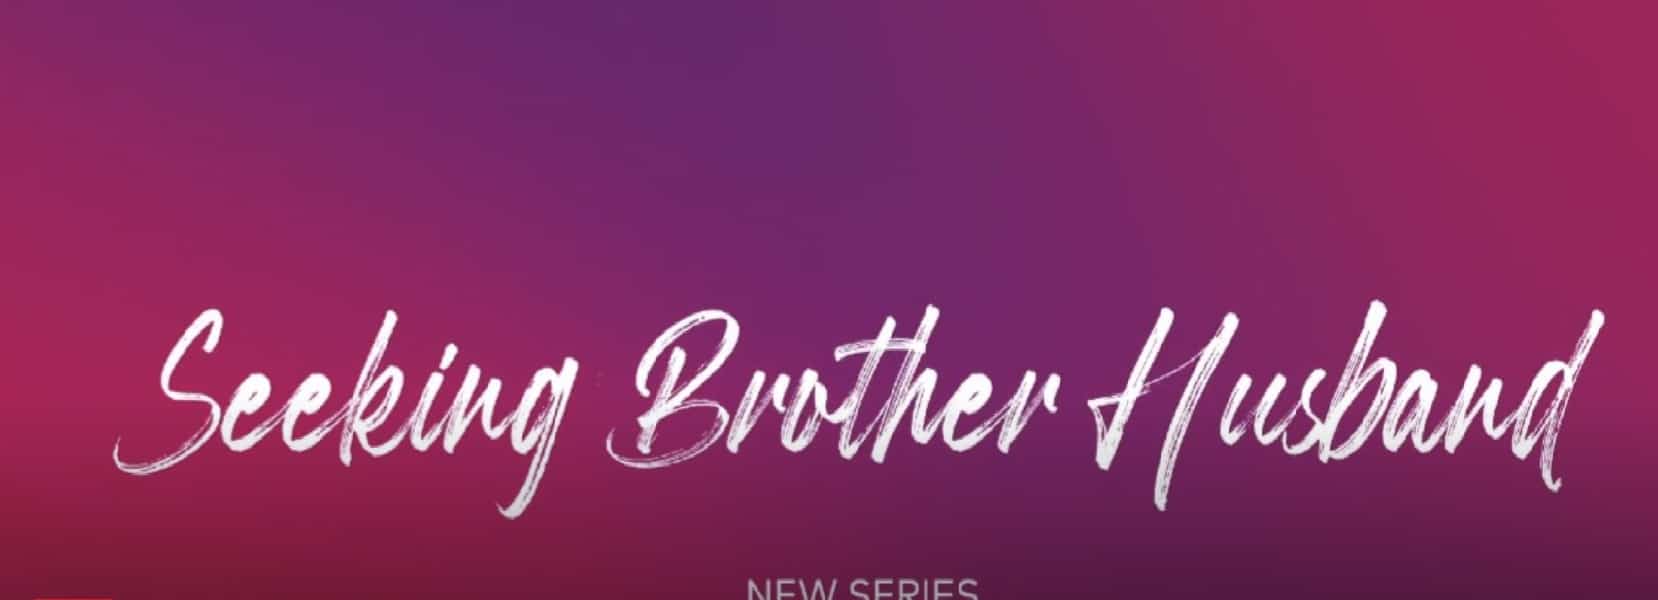 How To Watch Seeking Brother Husband Episodes? Streaming Guide